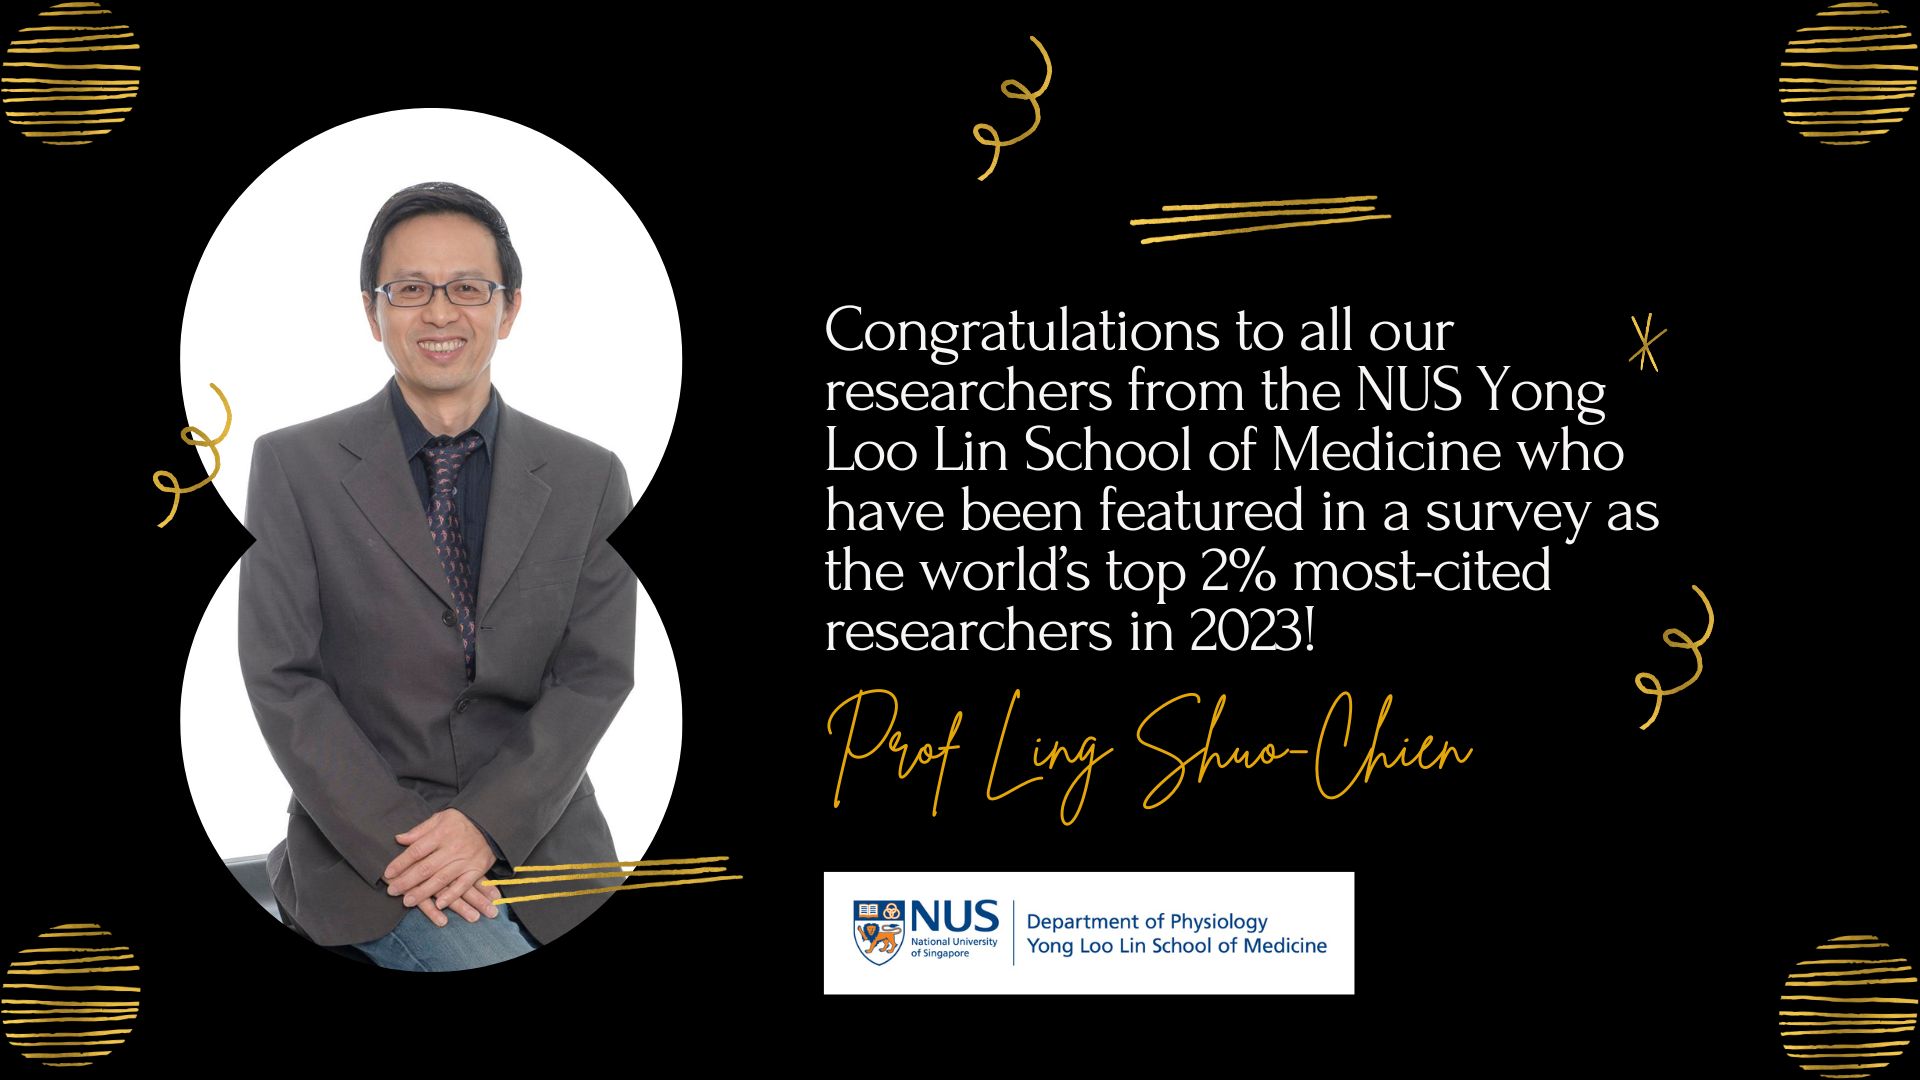 Congratulations to A/Prof Ling Shuo-Chien!